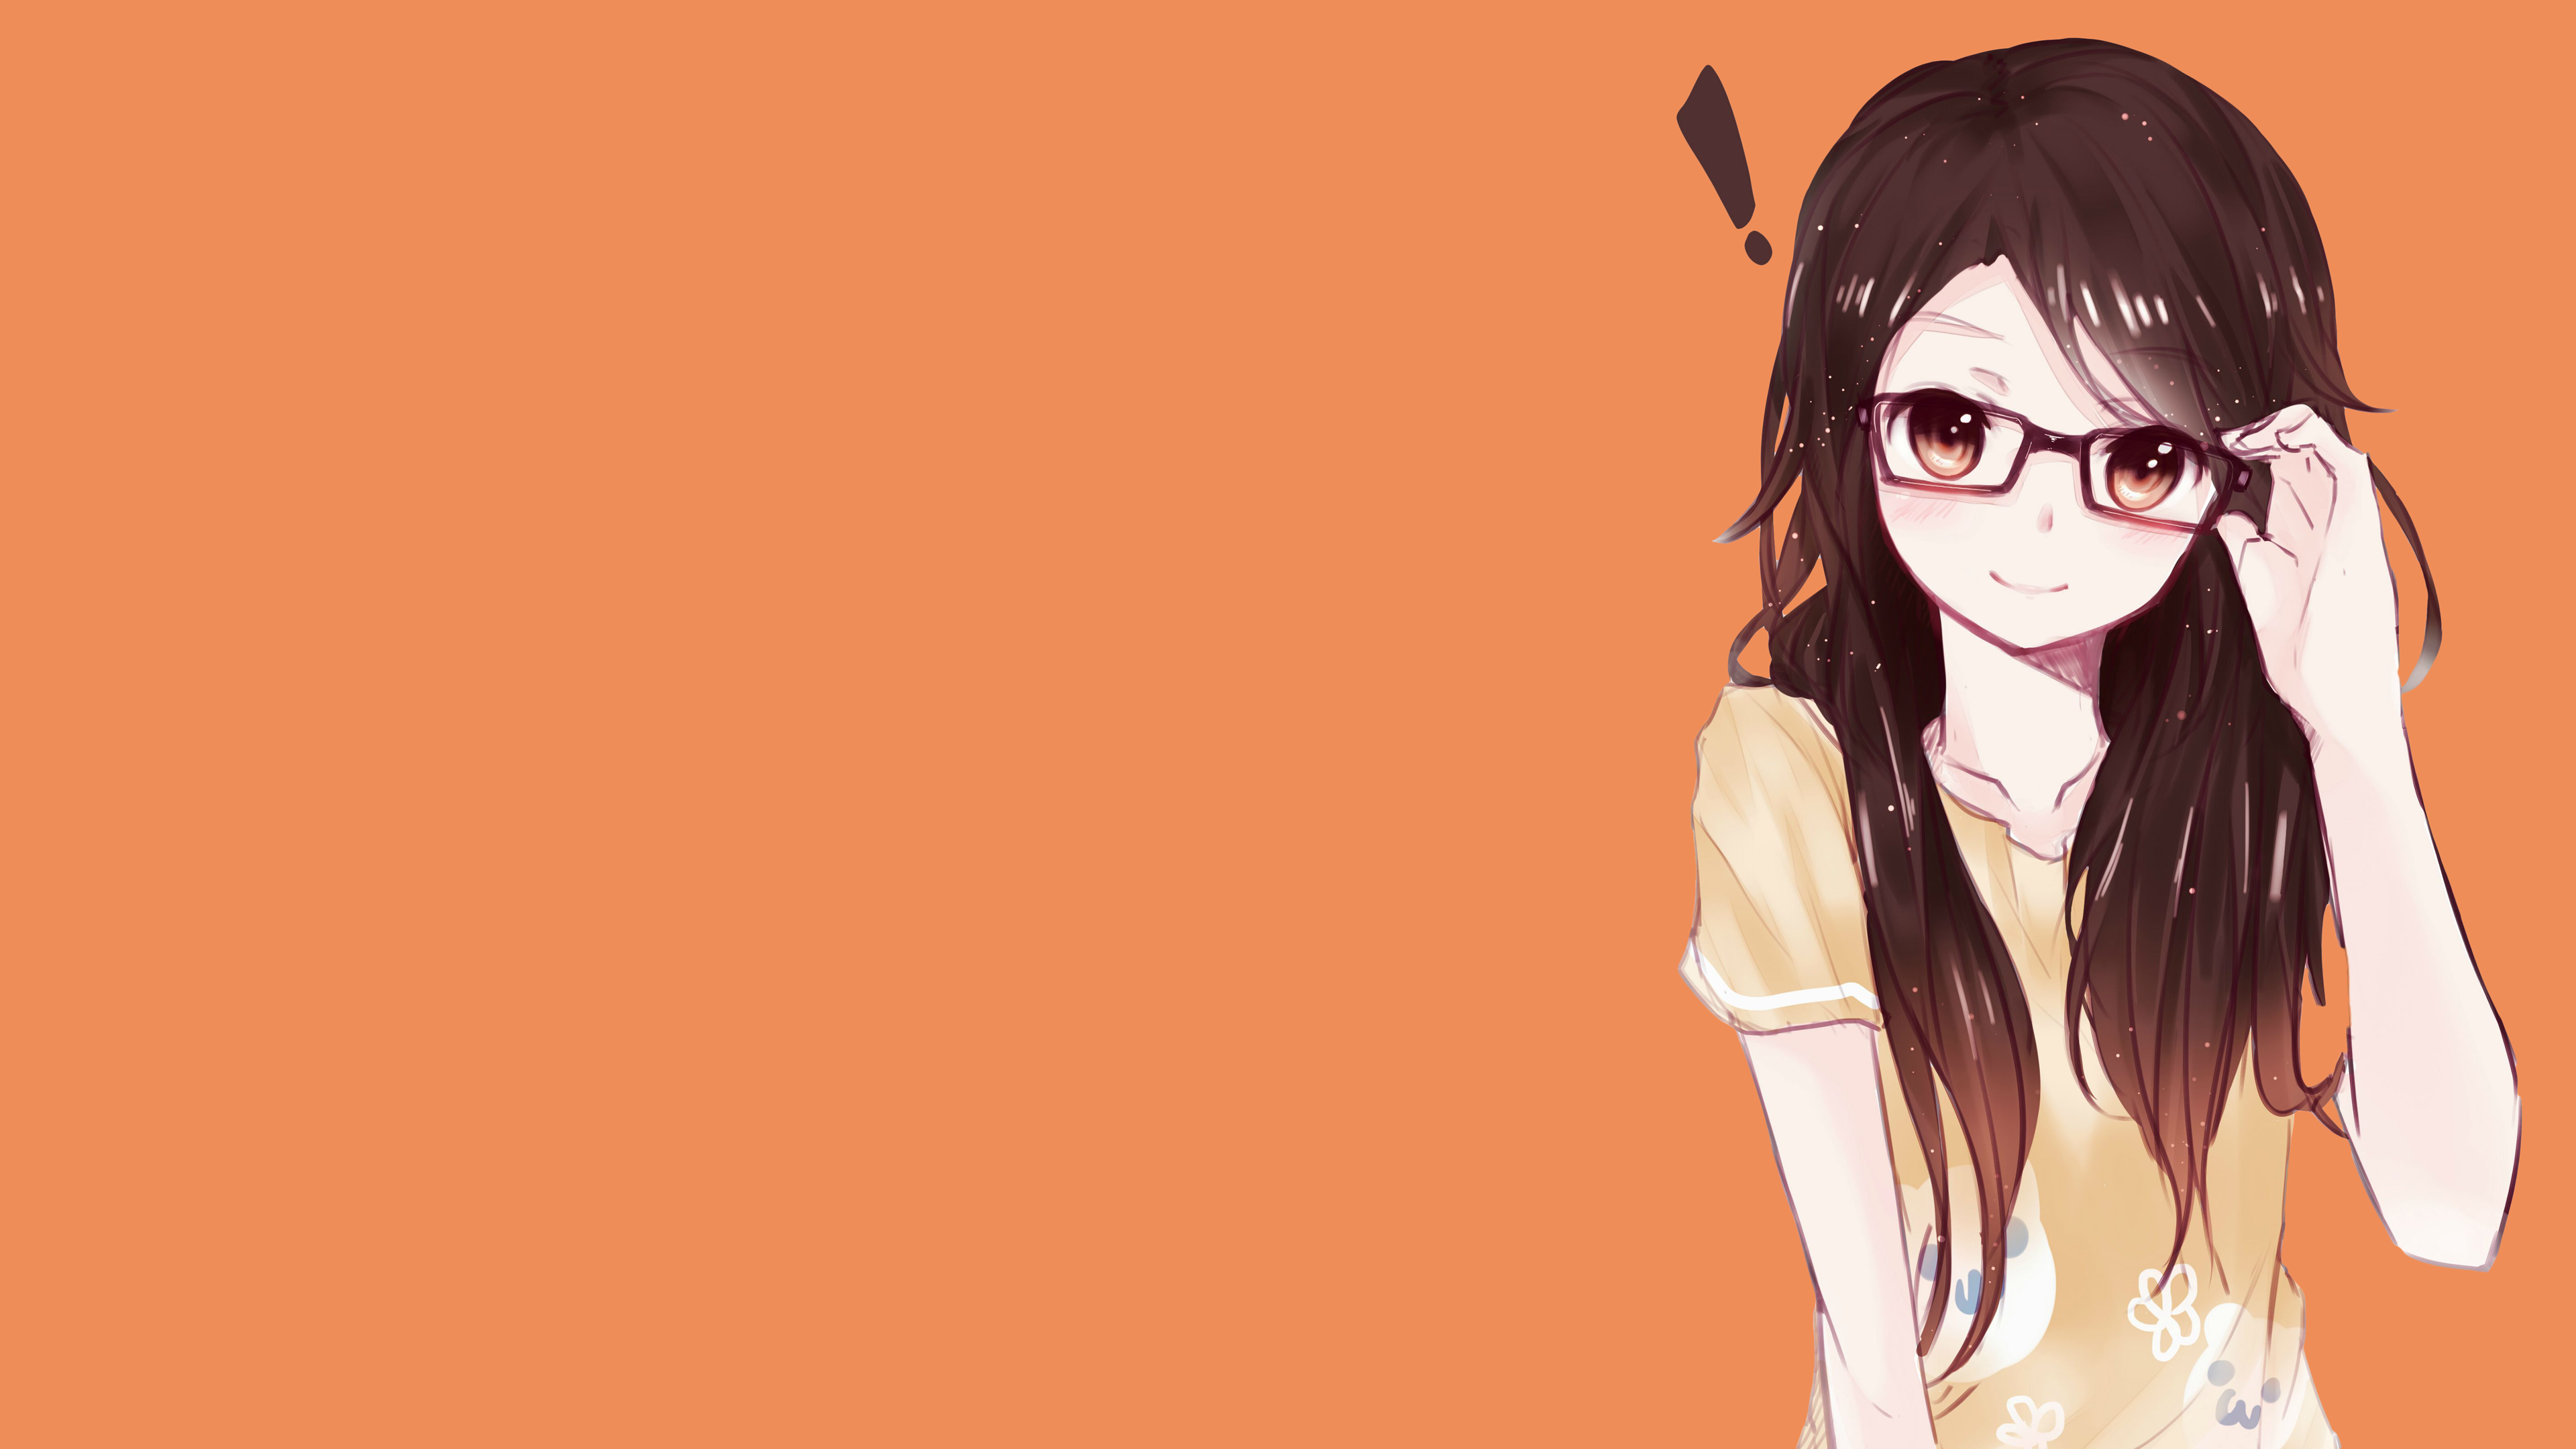 Download 3840x2160 Anime girl in glasses on an orange background